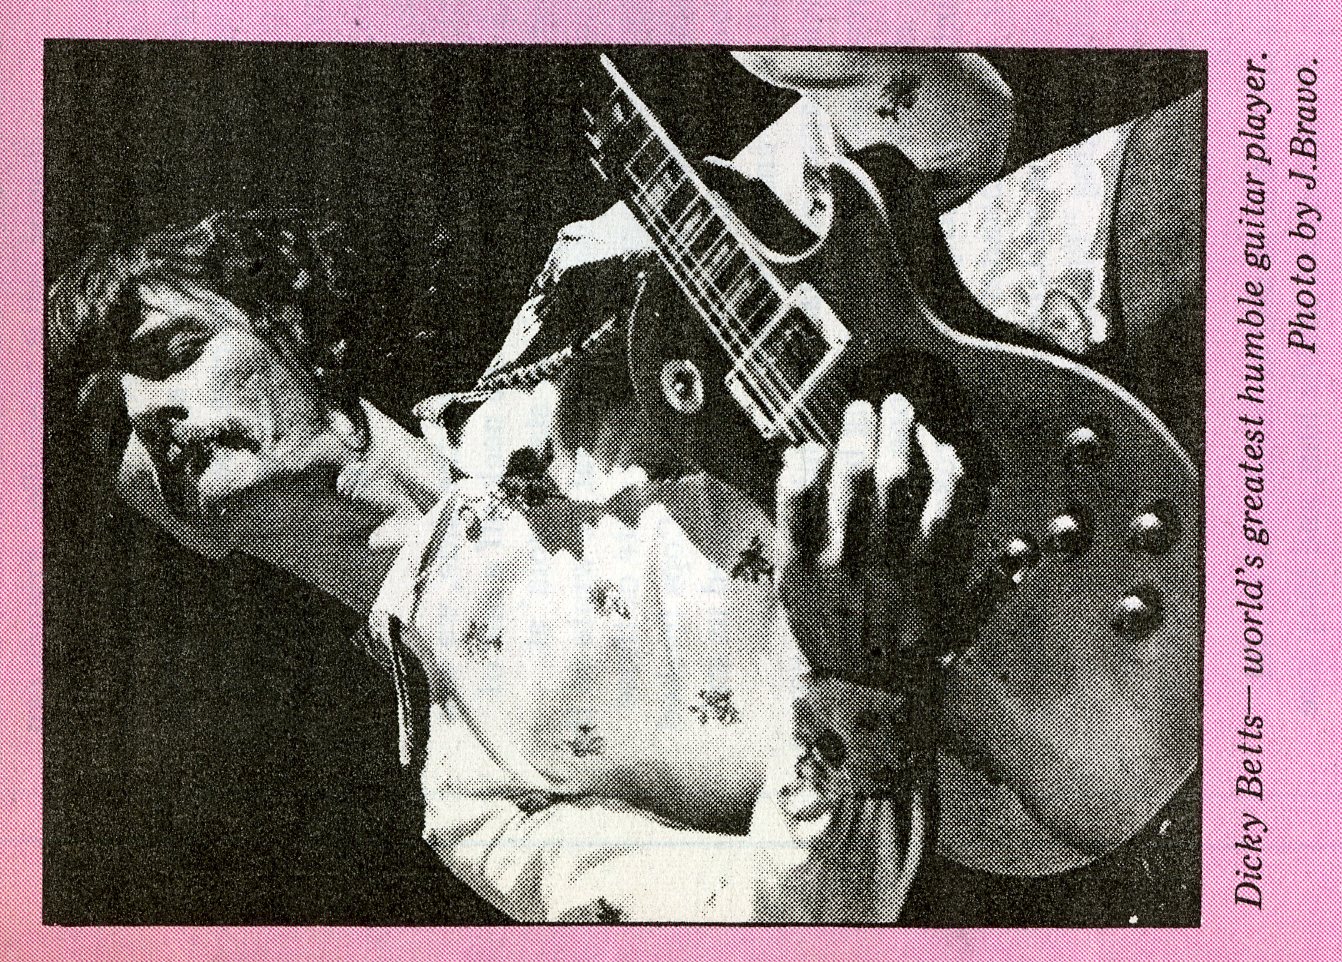 Dickey from June 1972 Issue of Rock Magazine